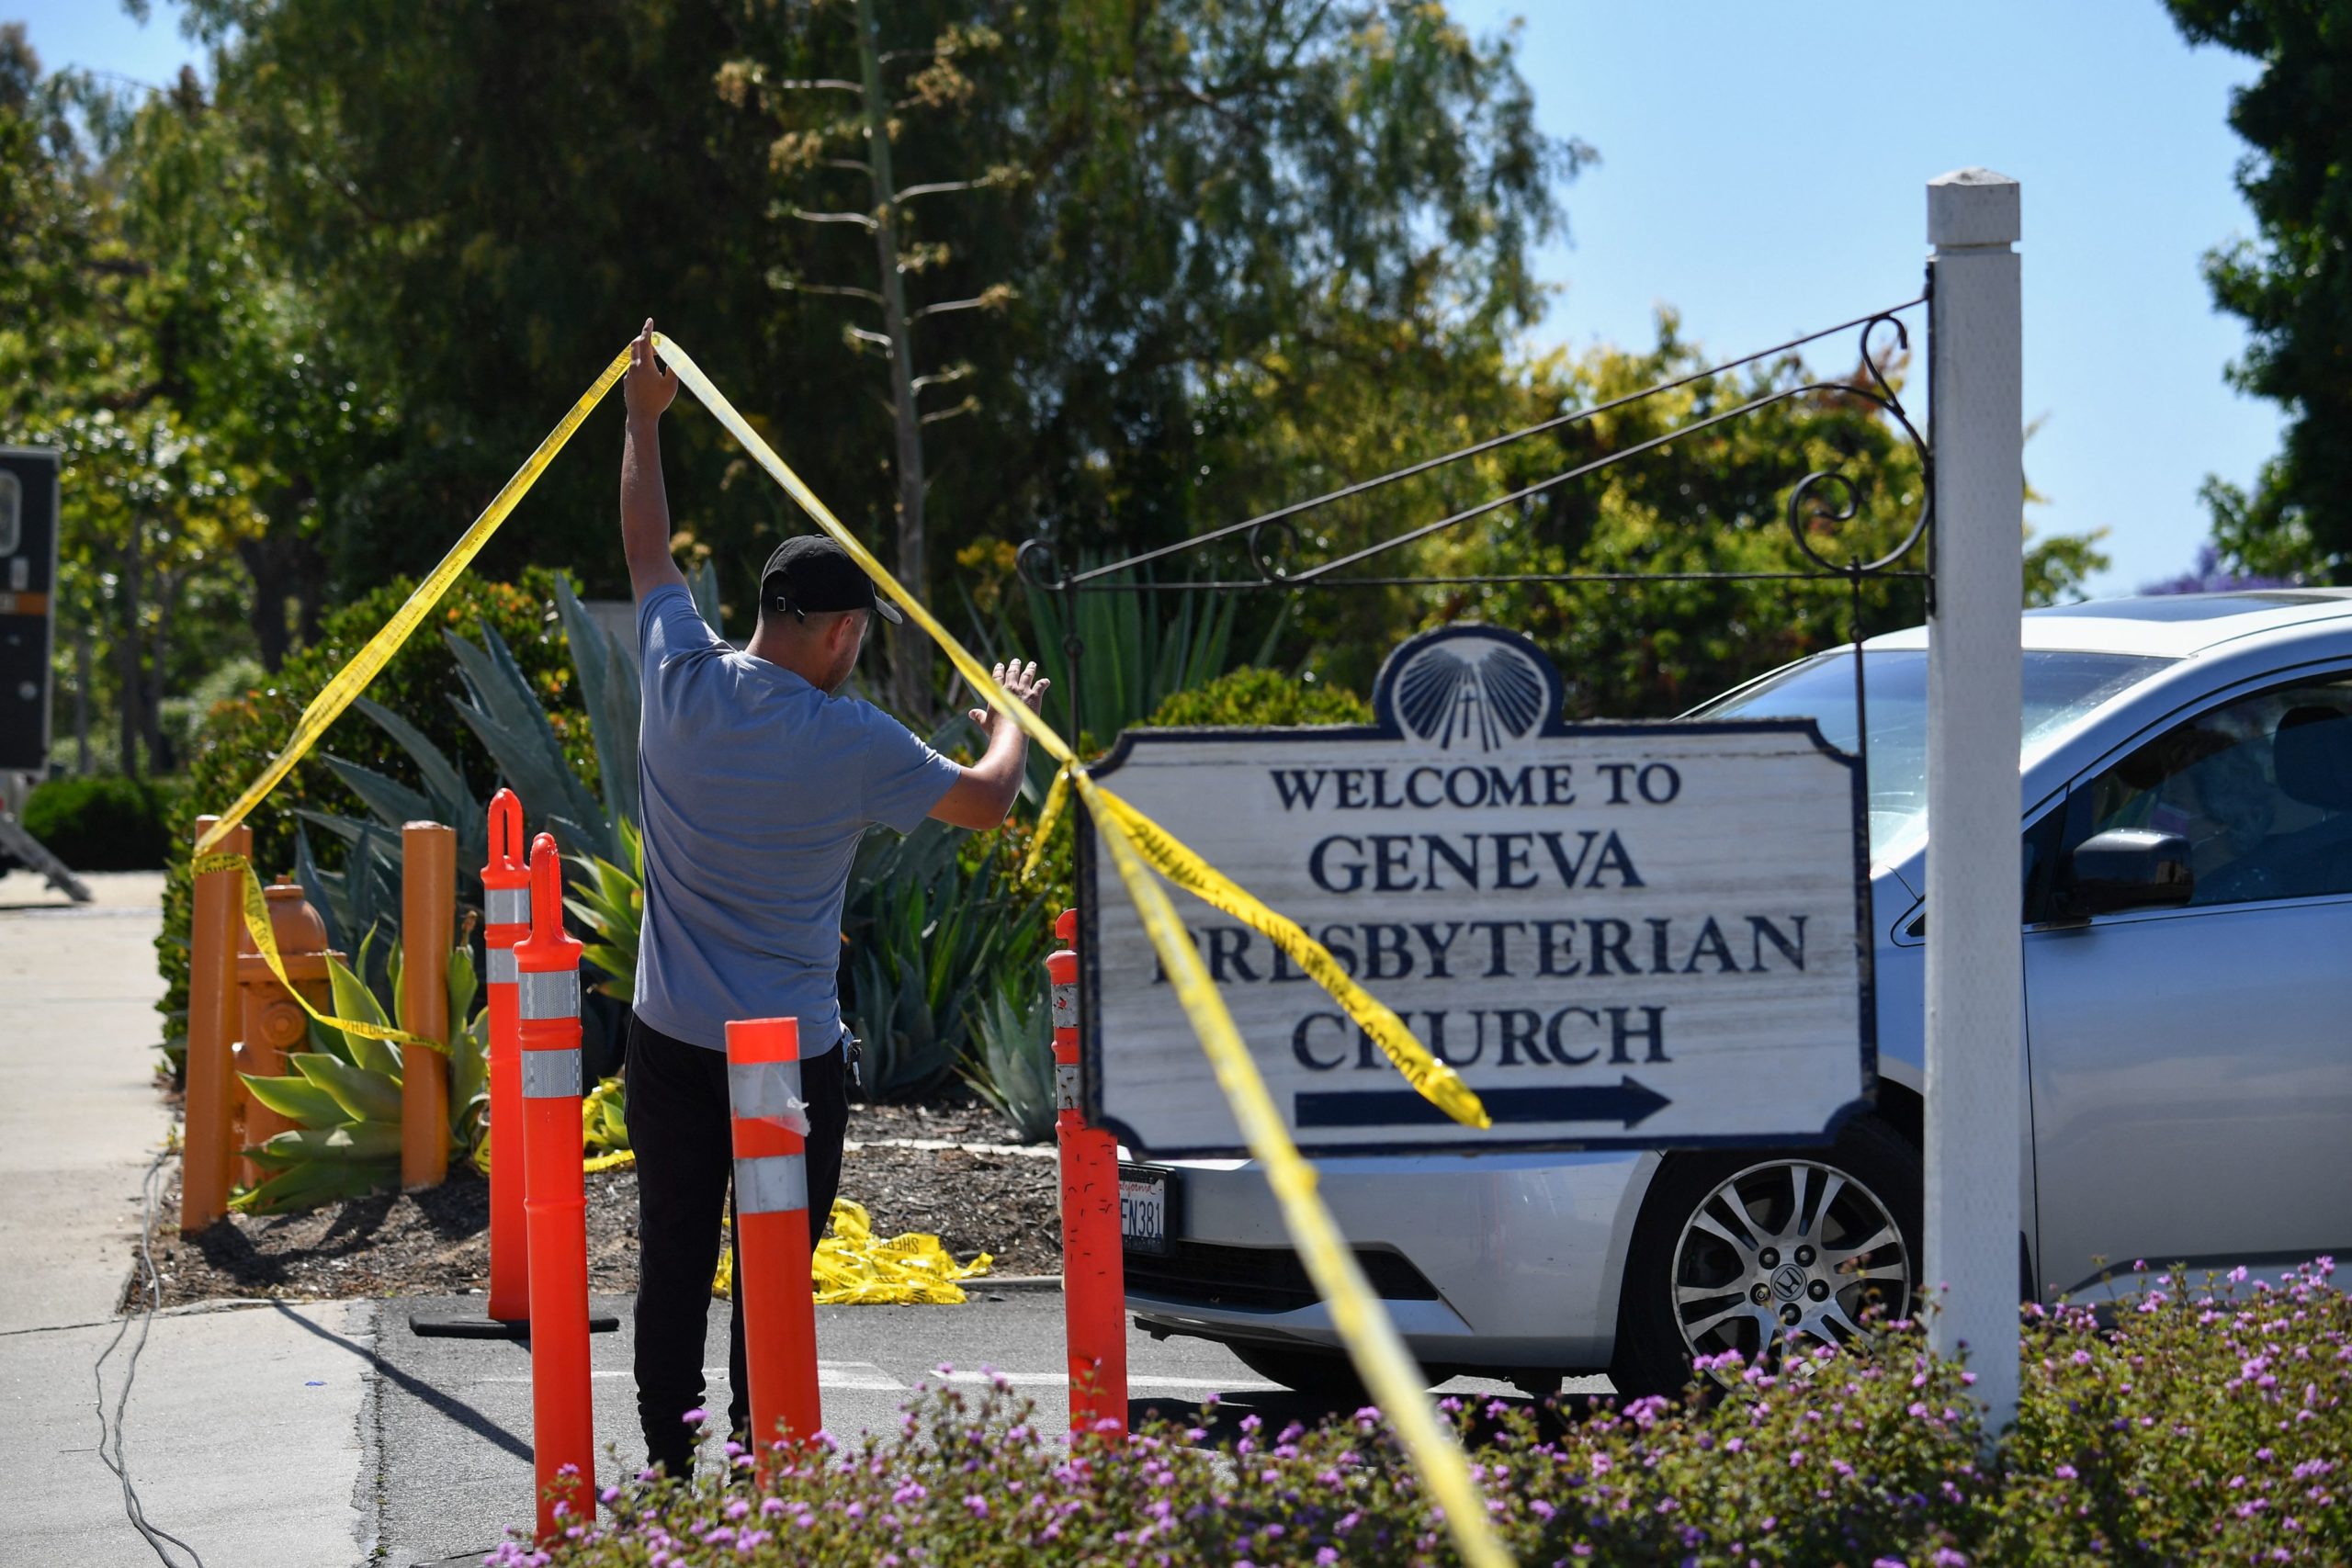 A church staff member raises police tape for a car to exit at the Geneva Presbyterian Church May 16, 2022 after one person was killed and five injured during a shooting May 15, 2022 at the church in Laguna Woods, California. - A Chinese immigrant who padlocked a church and opened fire on its Taiwanese-American congregation, killing one person and injuring five others, was motivated by hatred of the island and its people, US investigators said May 16. (Photo by Robyn Beck / AFP) (Photo by ROBYN BECK/AFP via Getty Images)